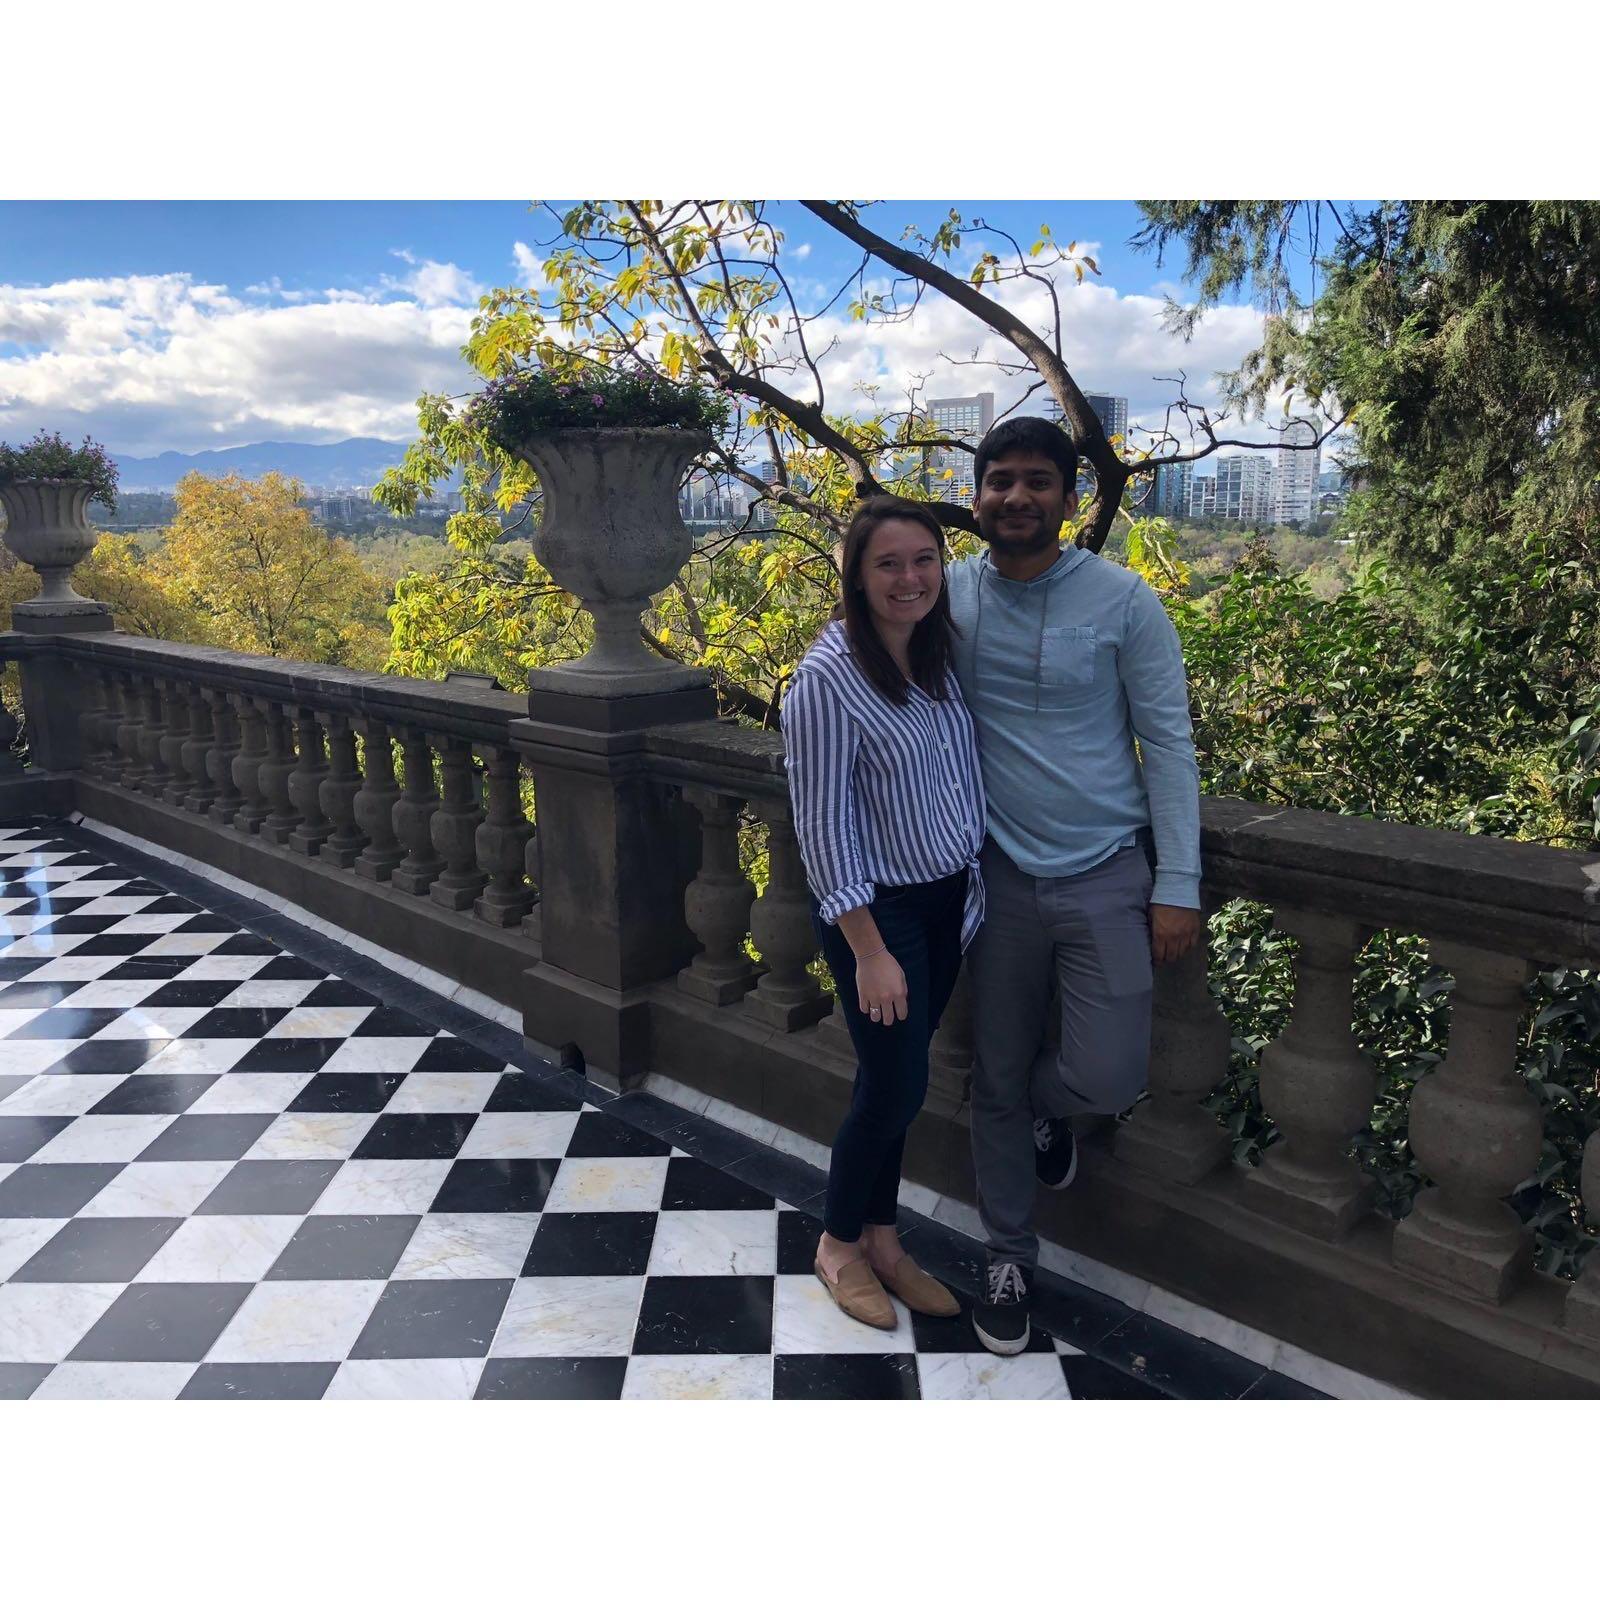 We visited Mexico City together during late 2019 to visit our dear friend Yvonne!